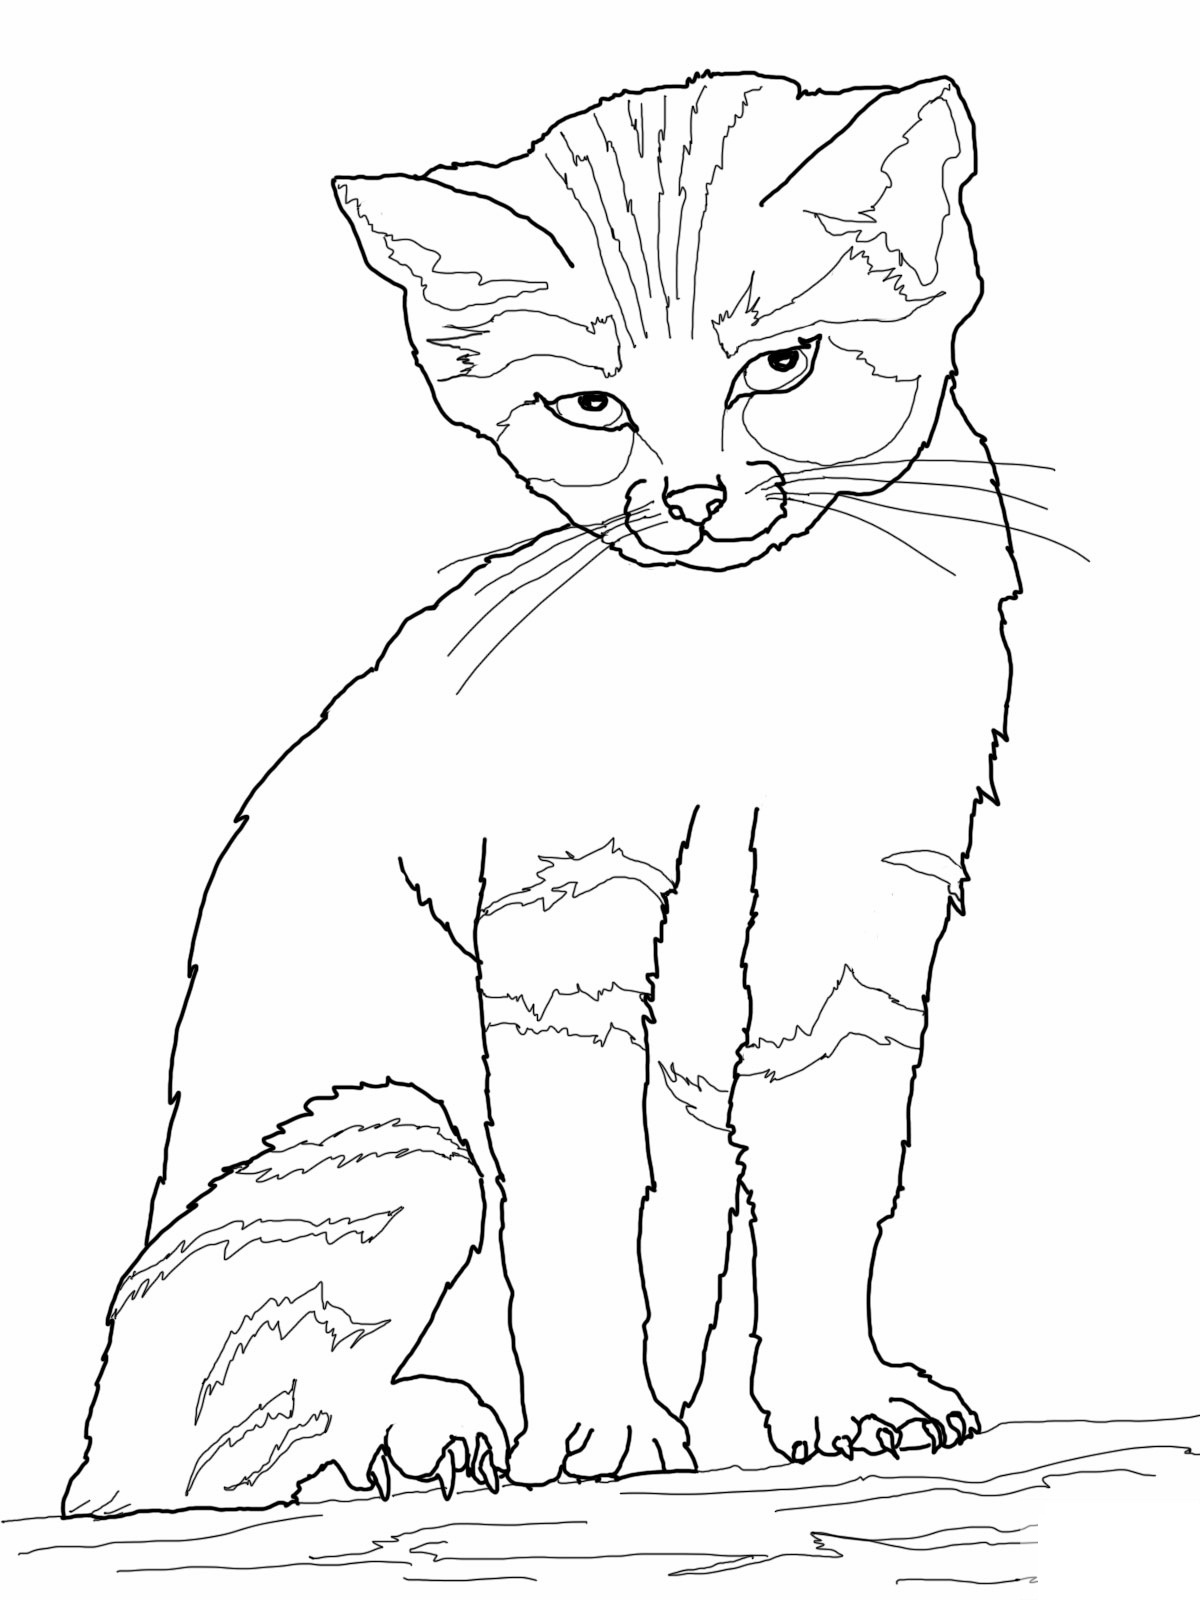 cat-coloring-pages-free-printable-printable-blank-world